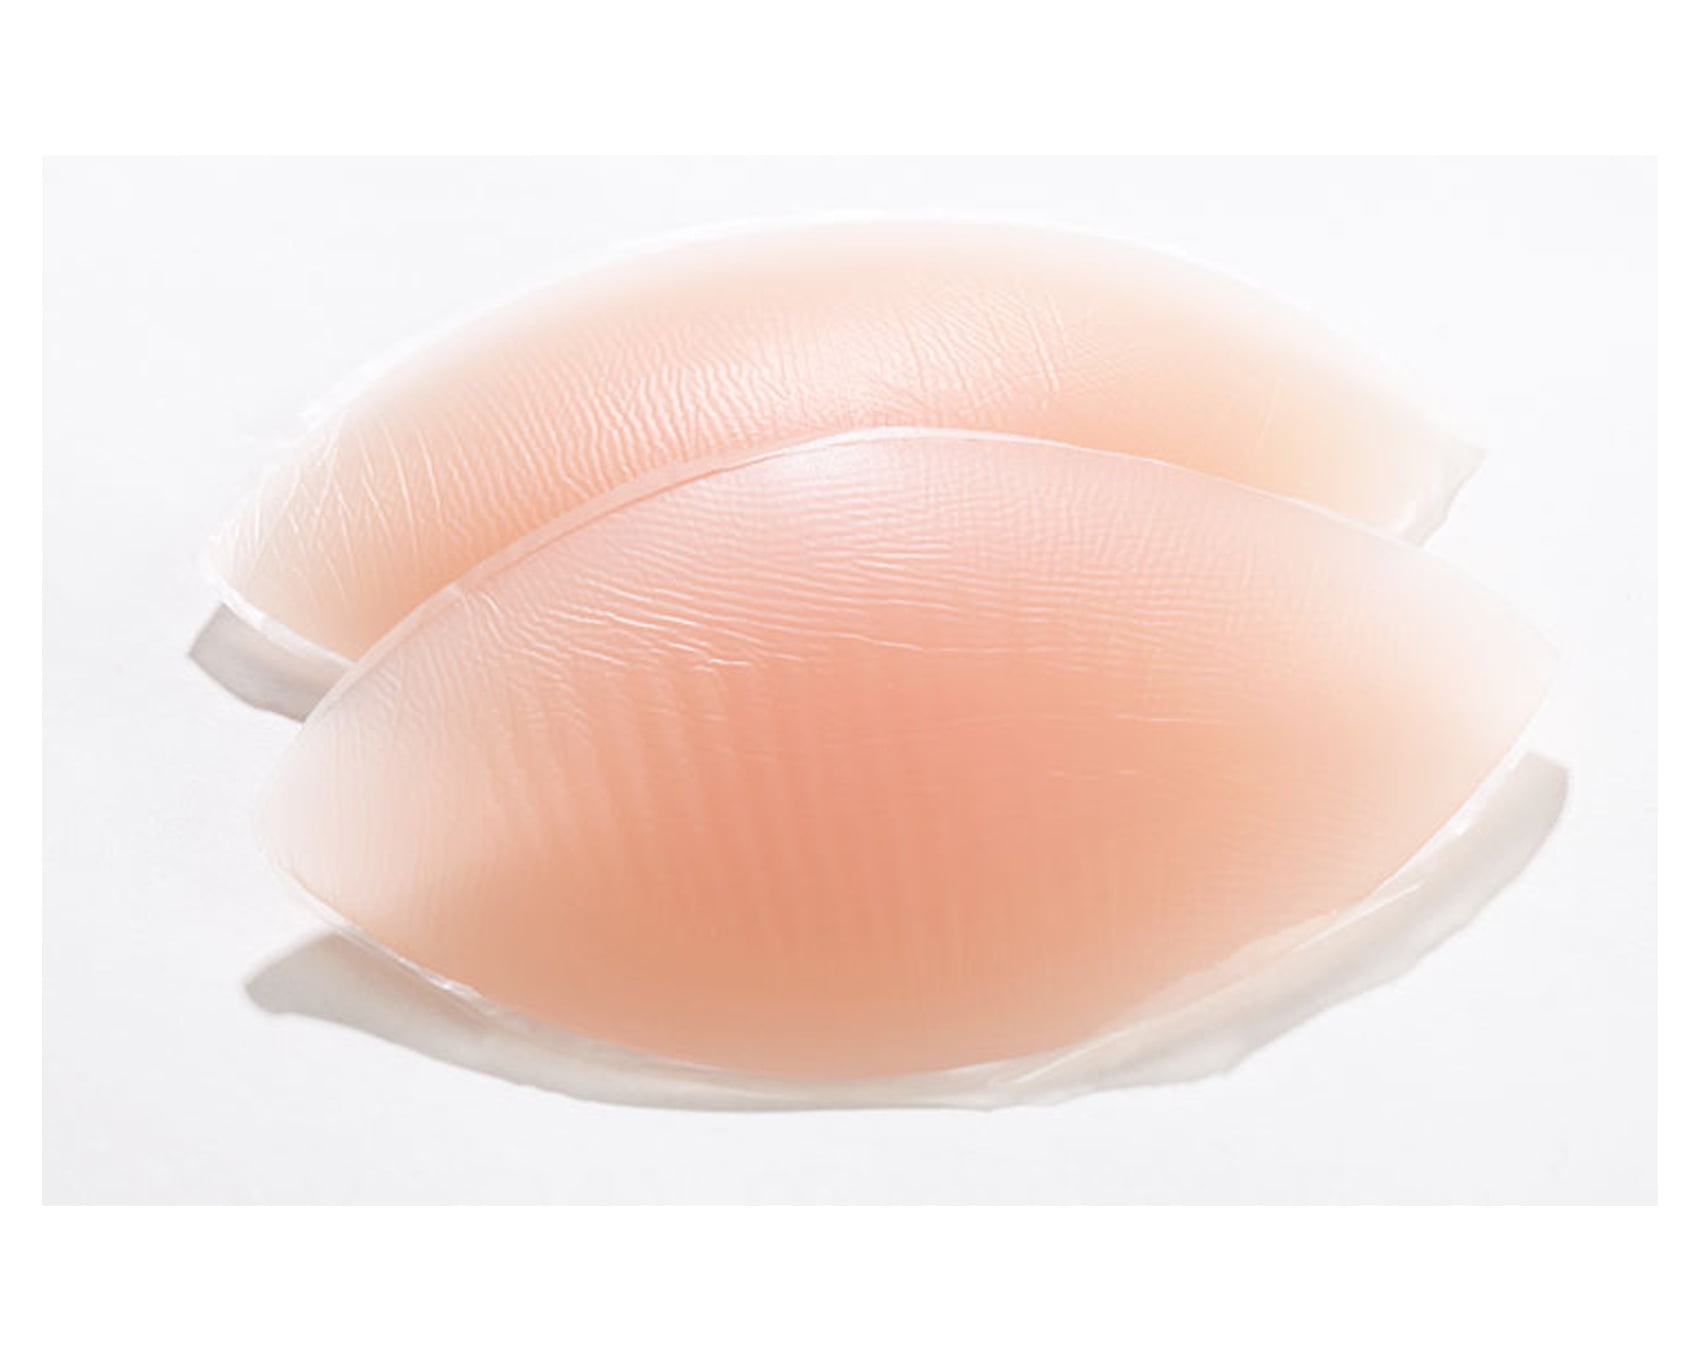 Women Breast Enhancers Waterproof Invisible Silicone Bra Inserts